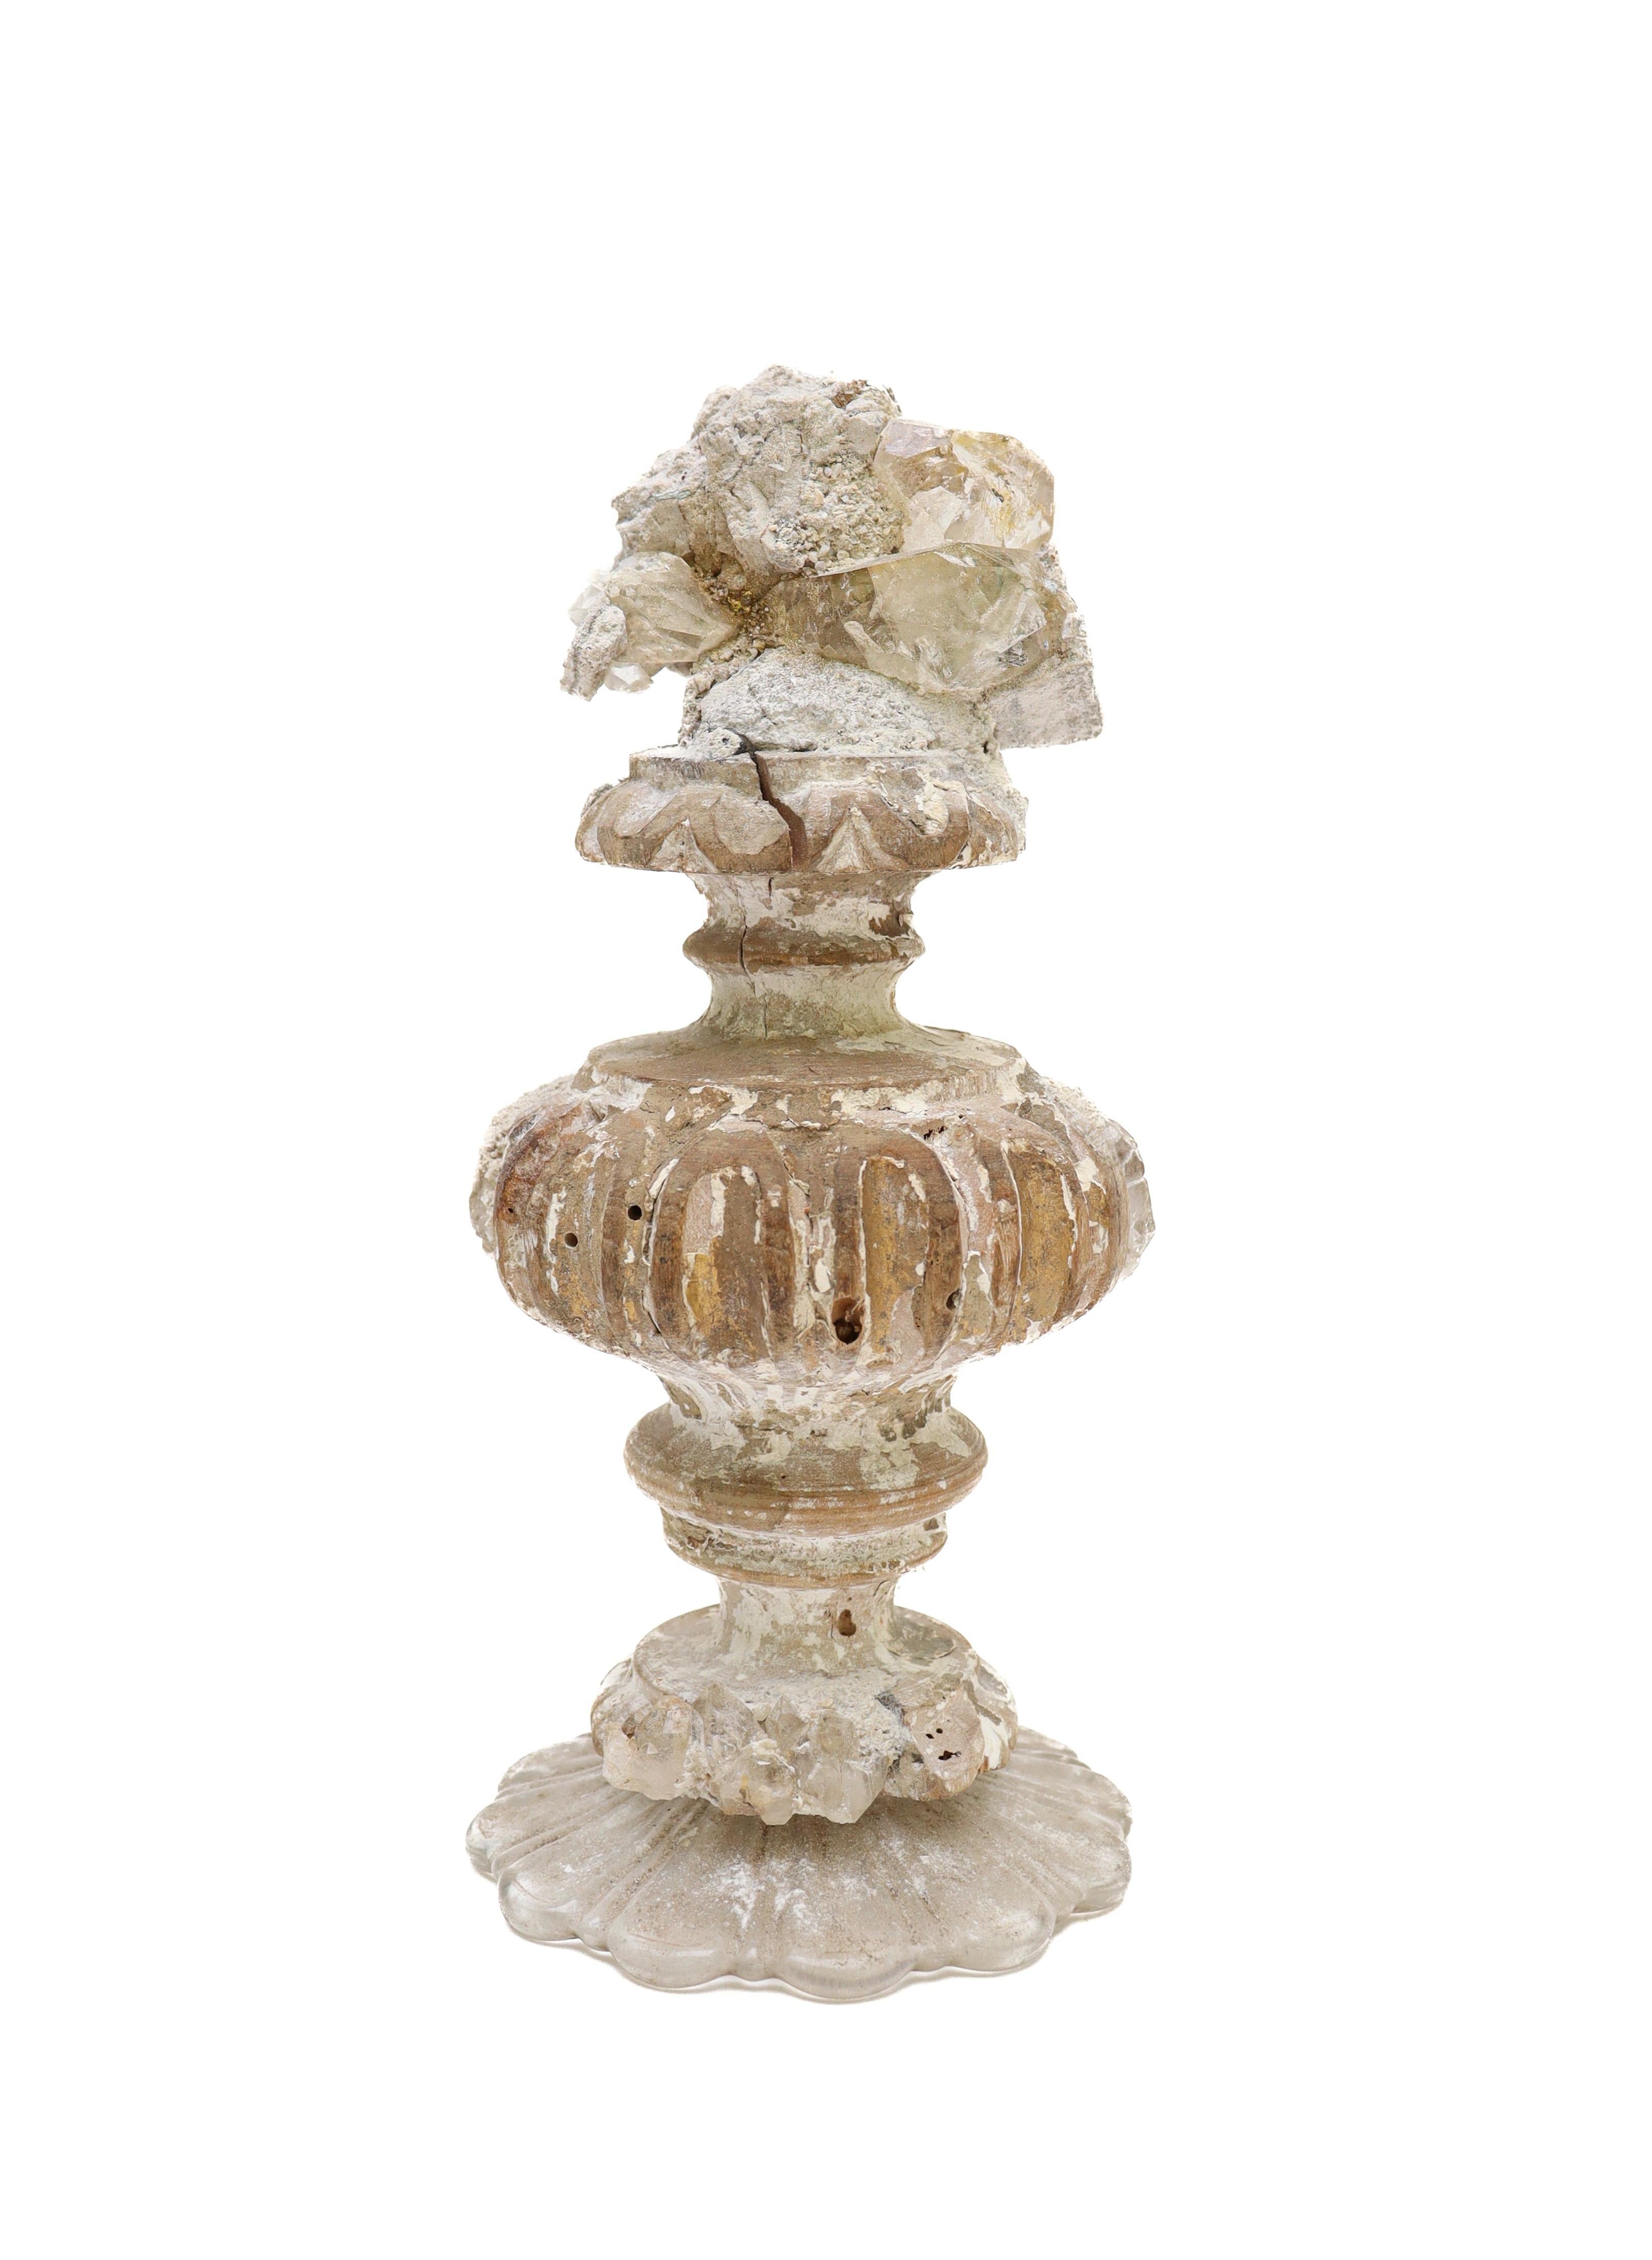 18th century Italian fragment with a calcite crystal cluster in matrix mounted on a Italian glass bobeche base.

The fragment is from a church in Florence. It was found and saved from the historic flooding of the Arno River in 1966. This piece has